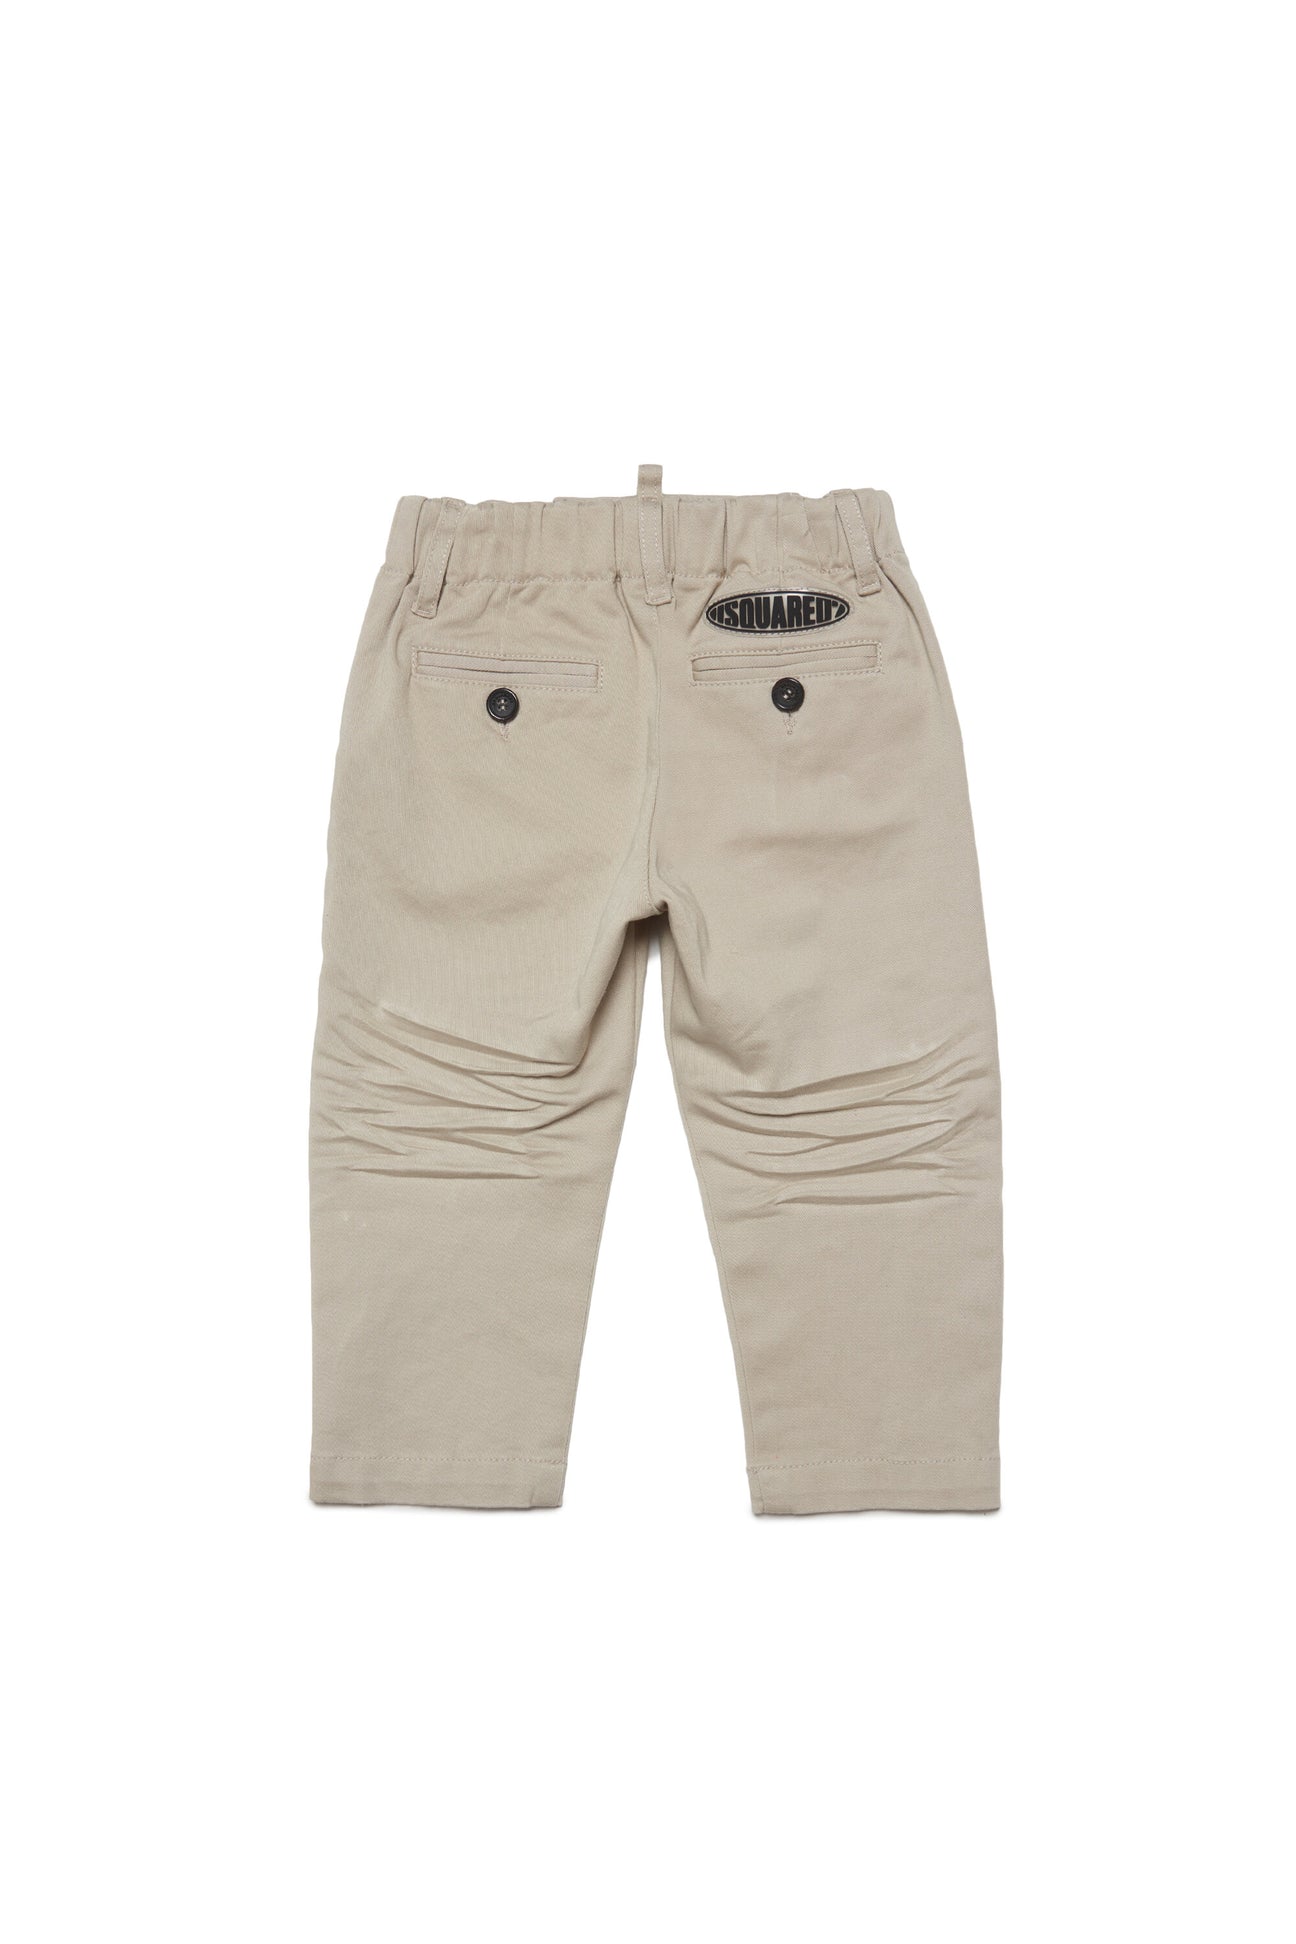 Gabardine chino pants branded with surf logo patch Gabardine chino pants branded with surf logo patch